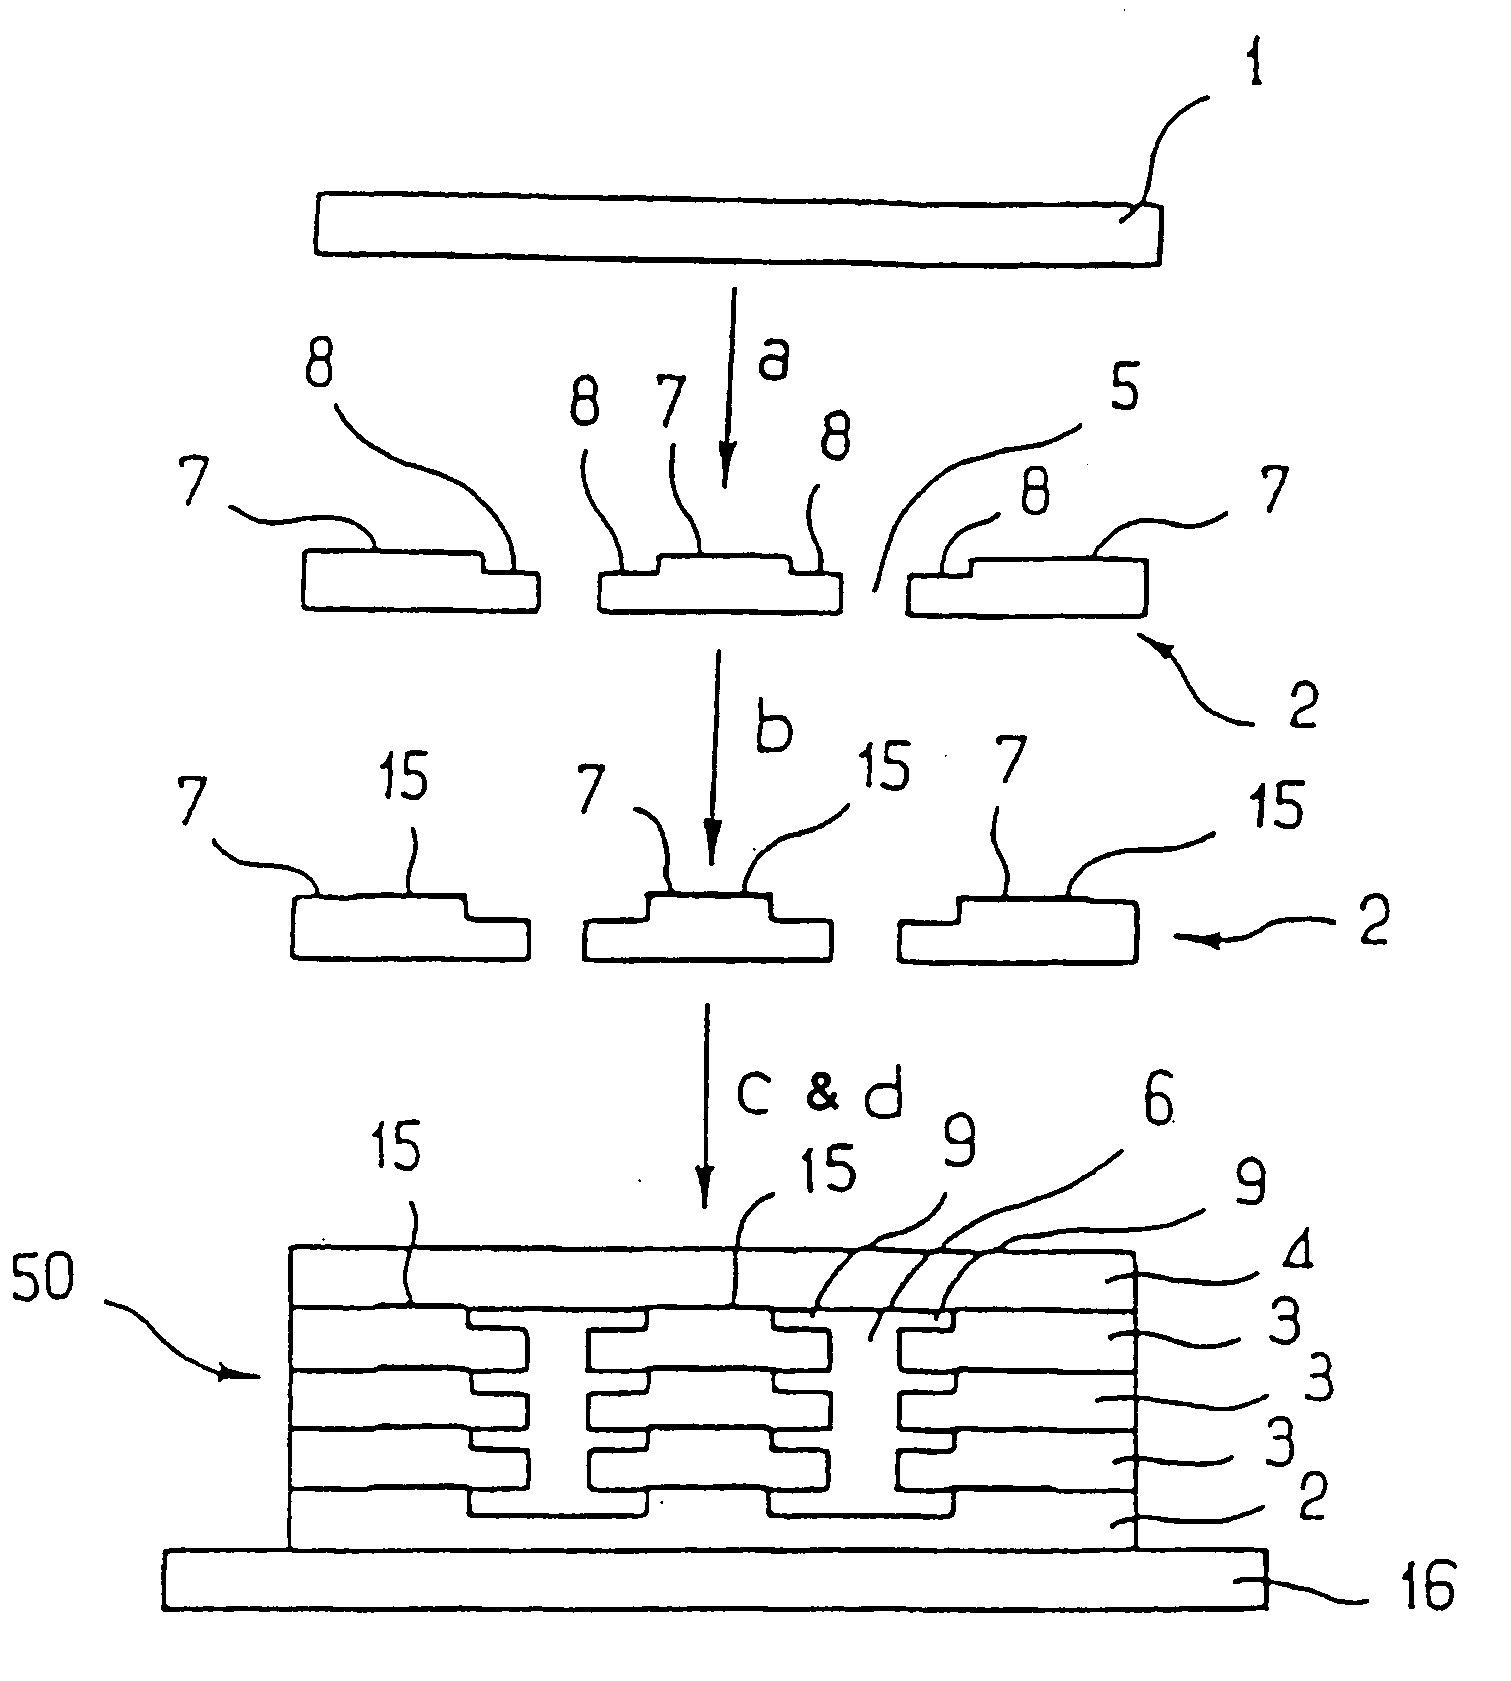 Heat exchanger device using a two-phase active fluid, and a method of manufacturing such a device